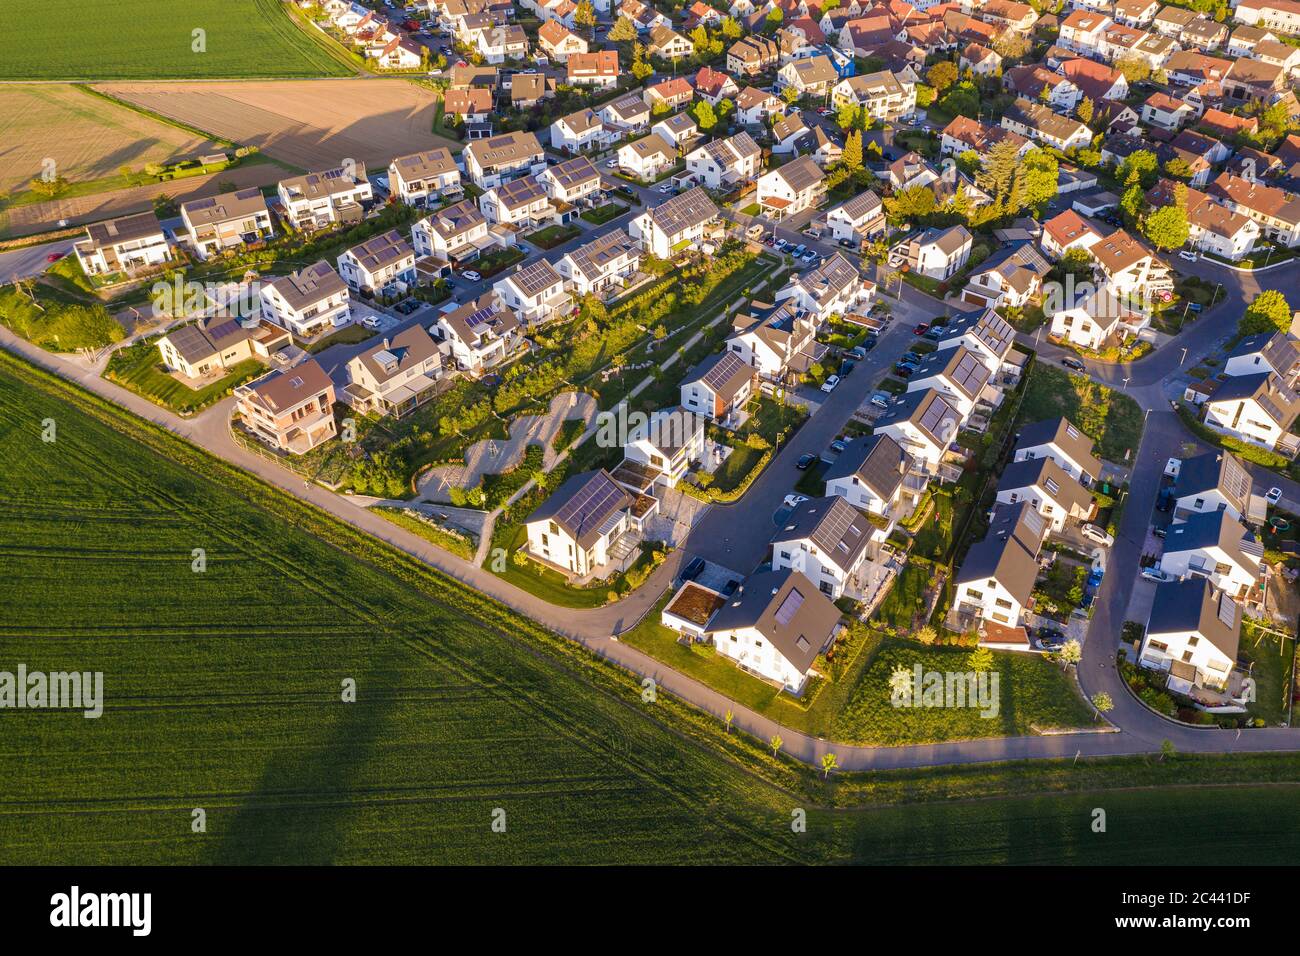 Germany, Baden-Wurttemberg, Waiblingen, Aerial view of modern suburb Stock Photo